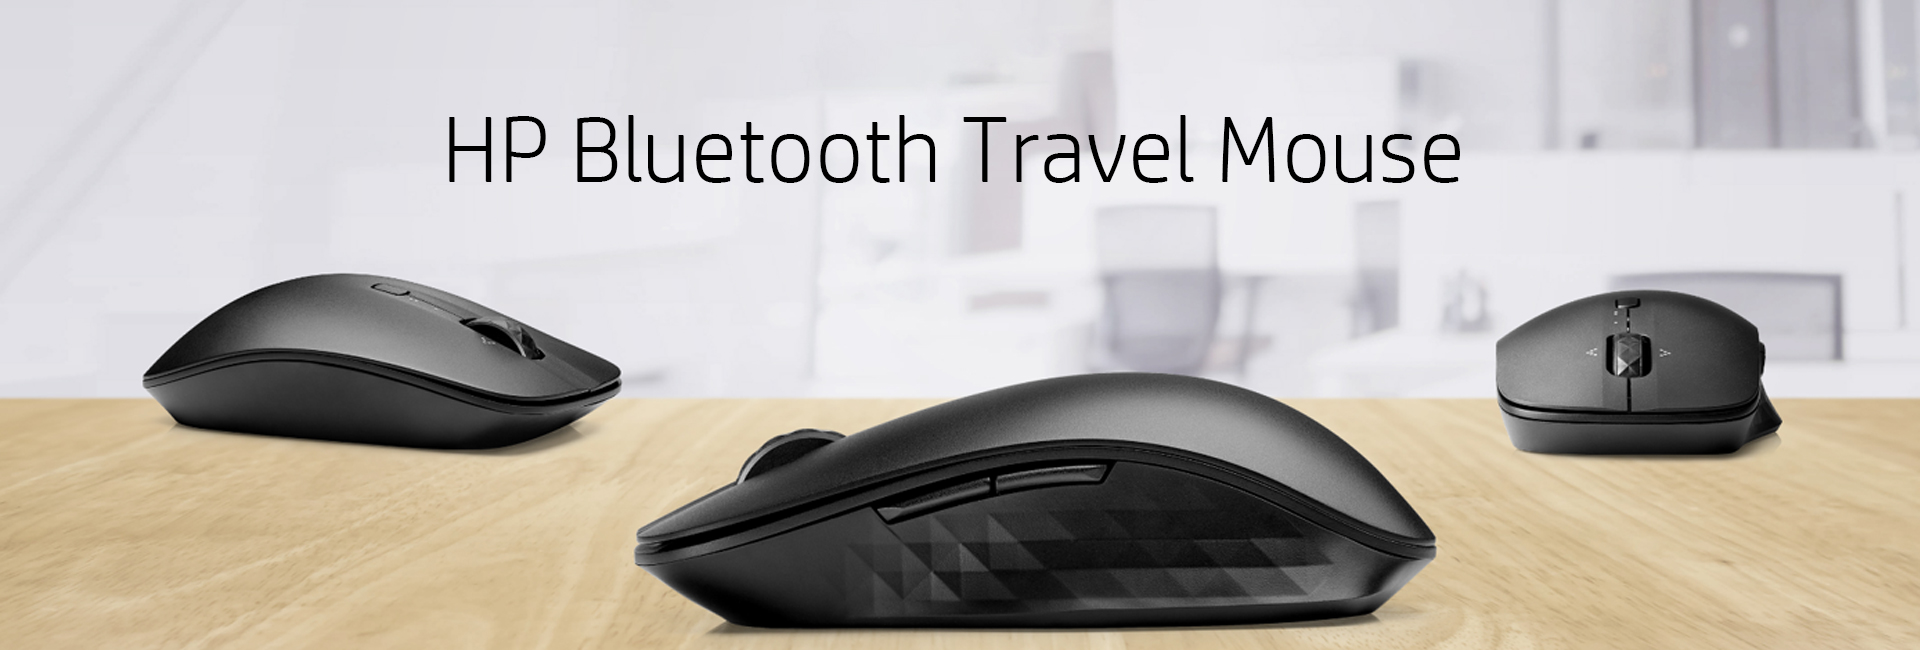 Mouse HP (6SP30UT#ABA) Travel Bluetooth